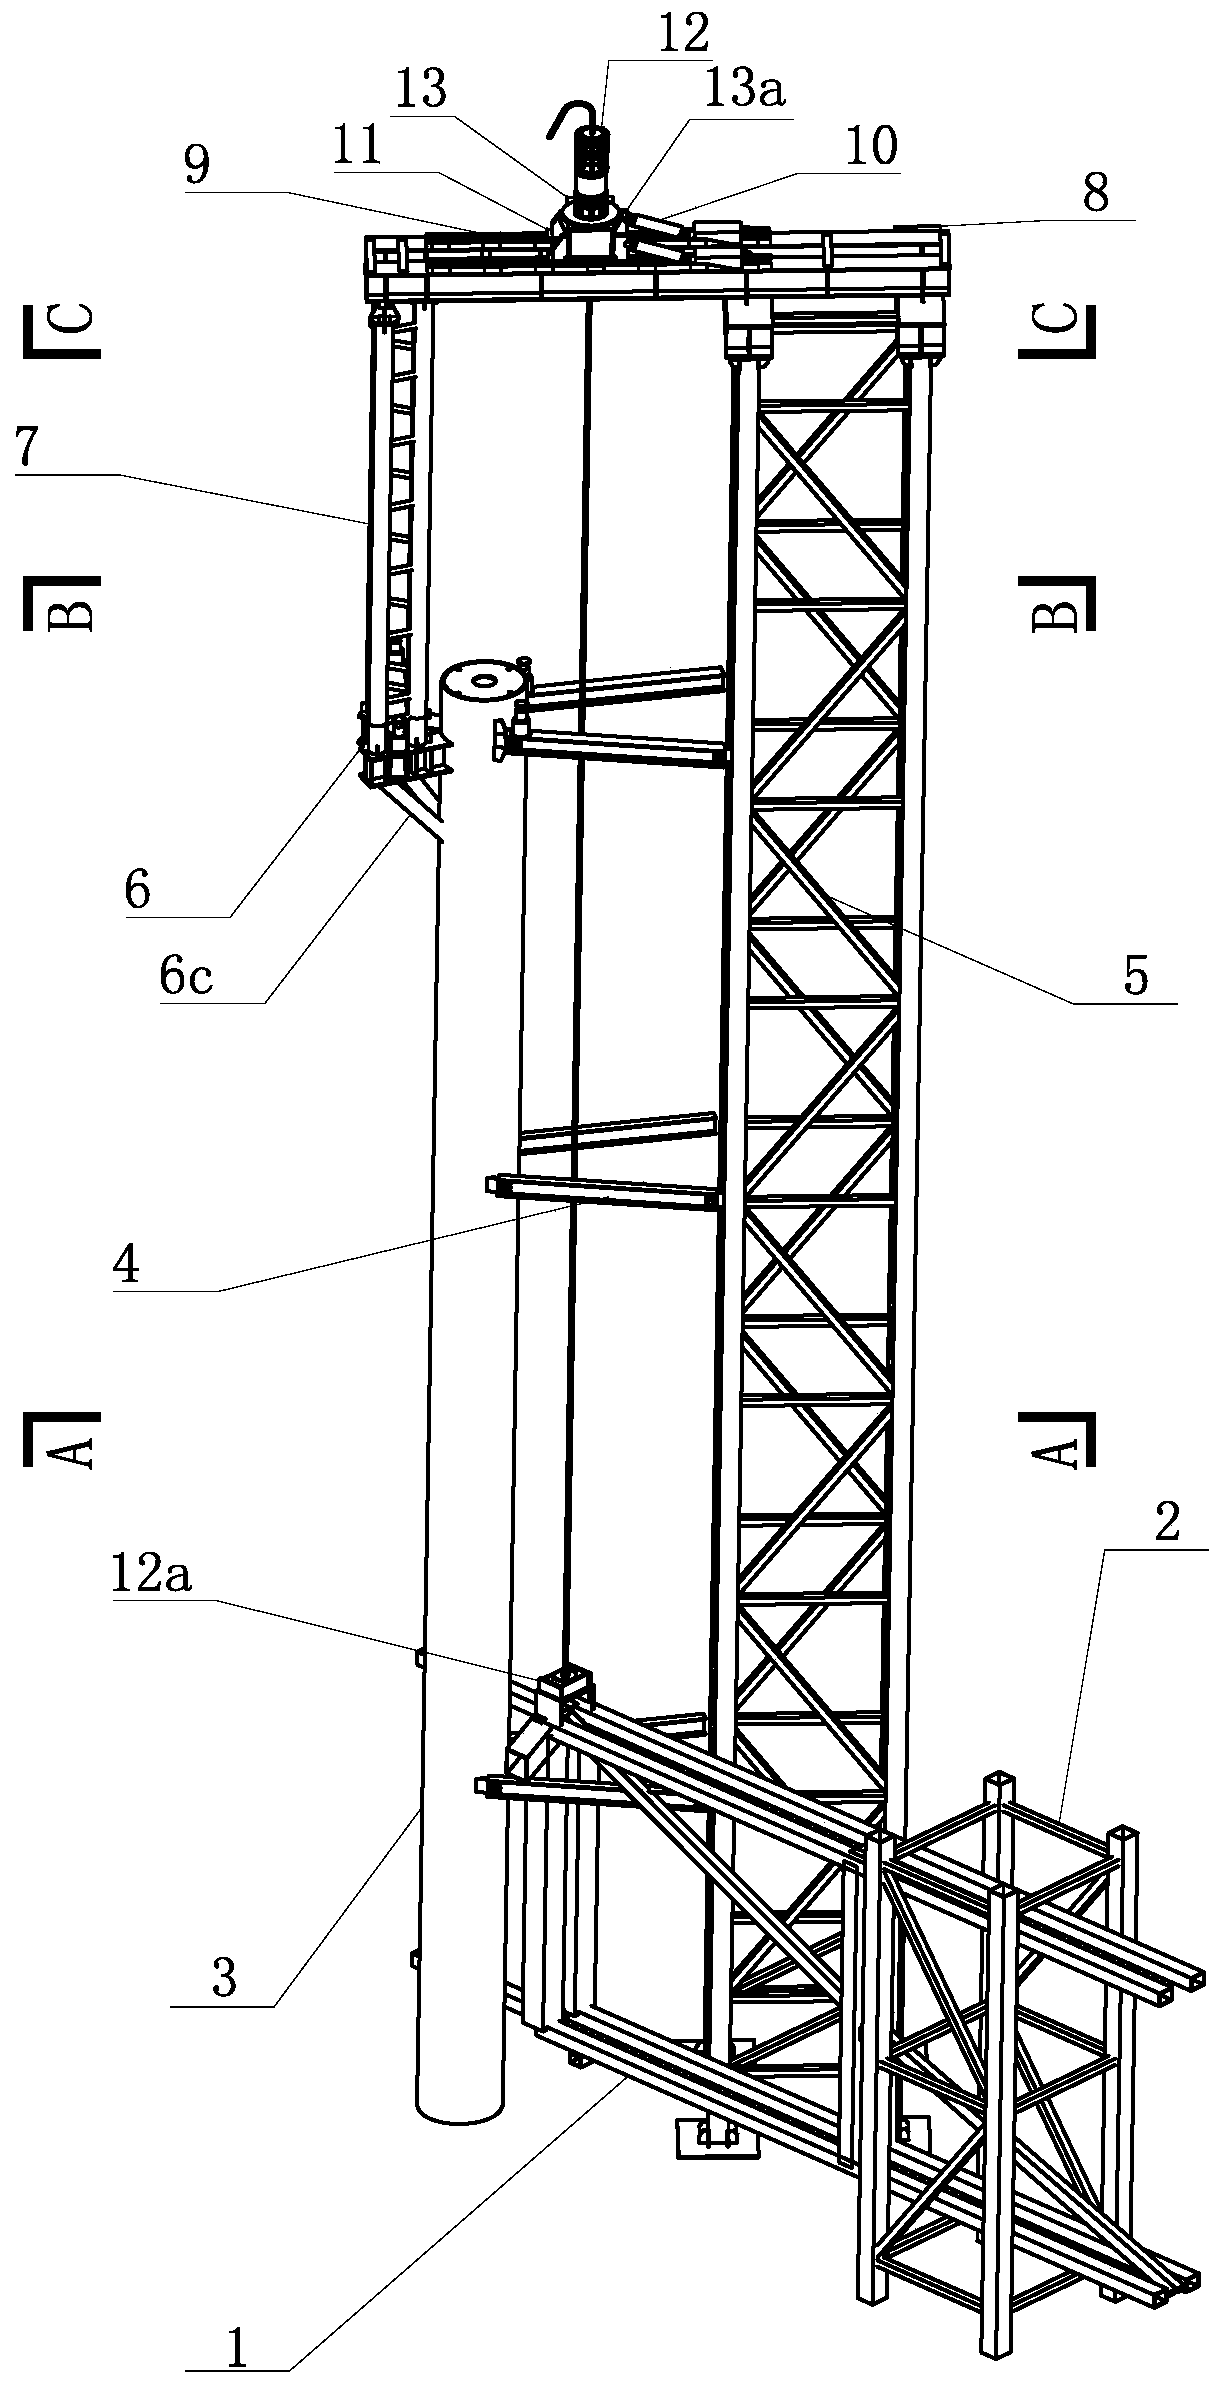 A device and method for offset lifting and sliding